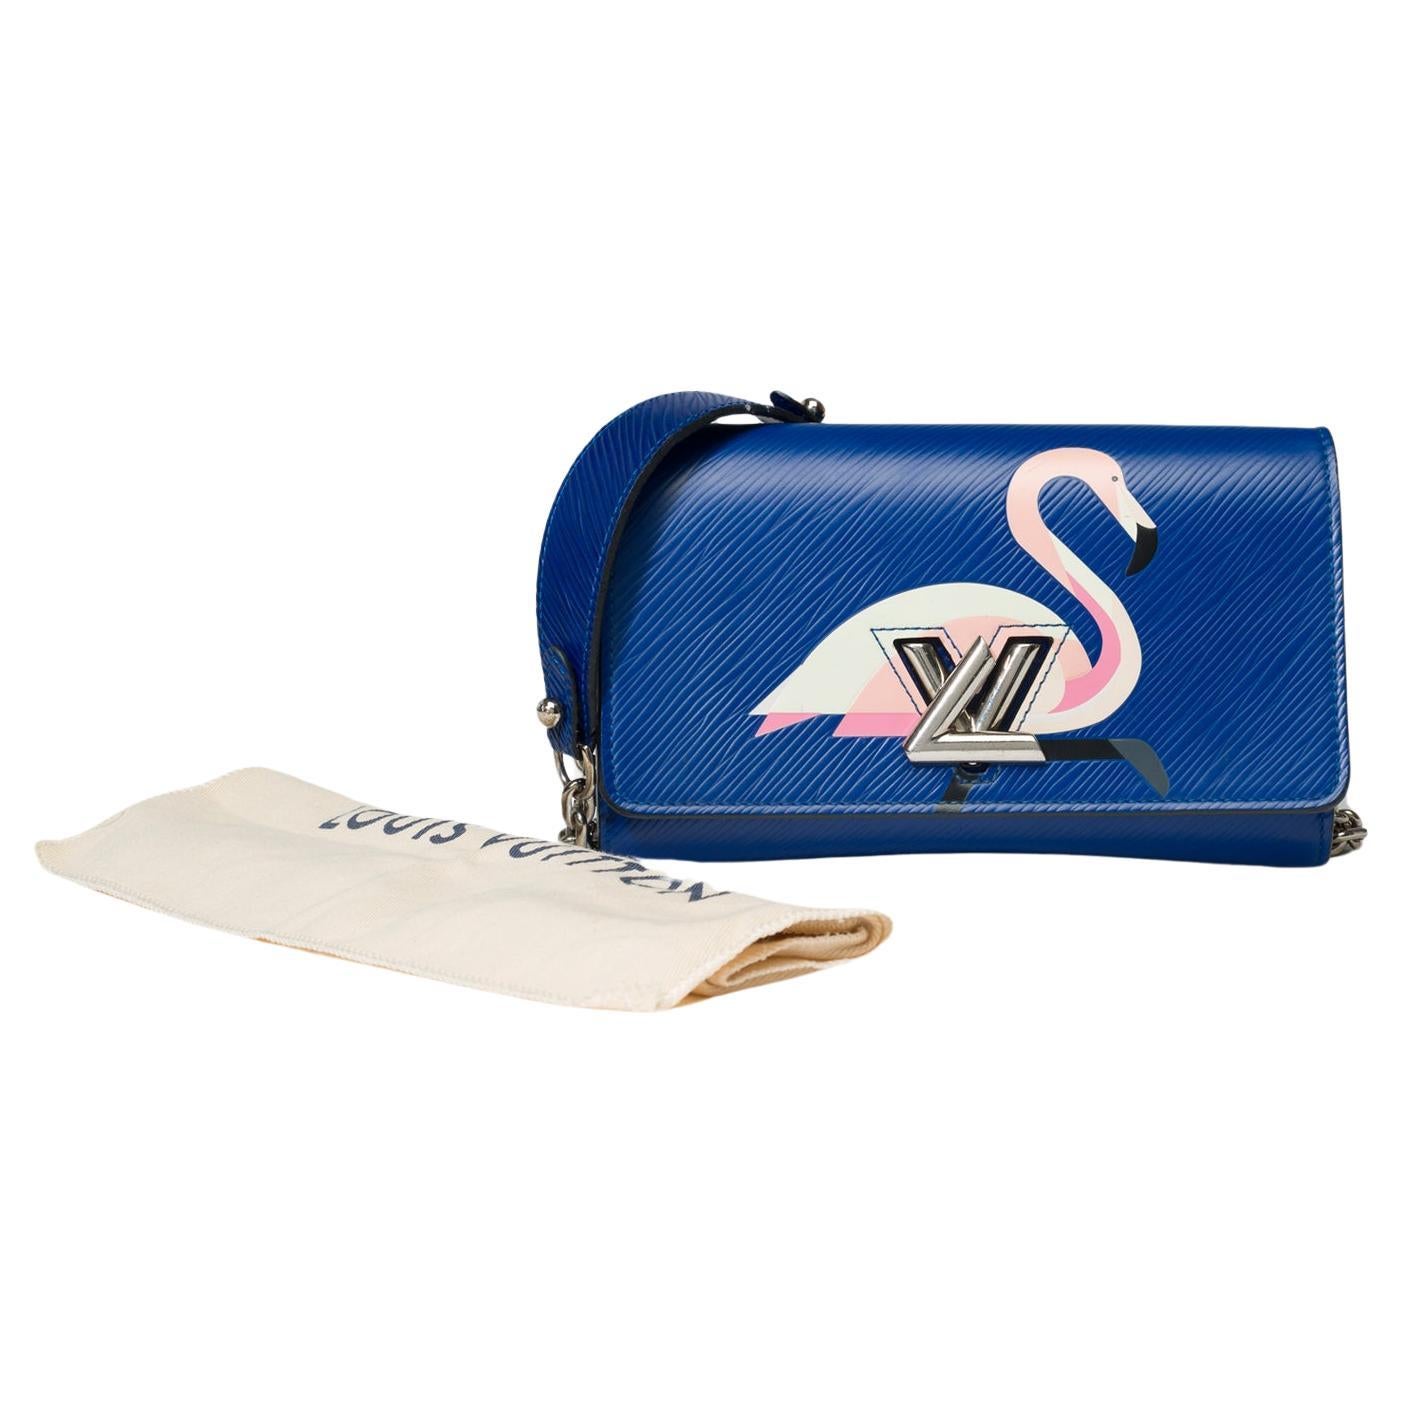 Beautiful​ ​Louis​ ​Vuitton​ ​Flamingo​ ​Twist​ ​limited​ ​edition​ ​in​ ​blue​ ​epi​ ​leather​ ​enhanced​ ​with​ ​the​ ​flamingo​ ​pattern,​ ​silver​ ​metal​ ​trim,​ ​silver​ ​metal​ ​handle​ ​for​ ​a​ ​shoulder​ ​or​ ​shoulder​ ​strap

Flap​